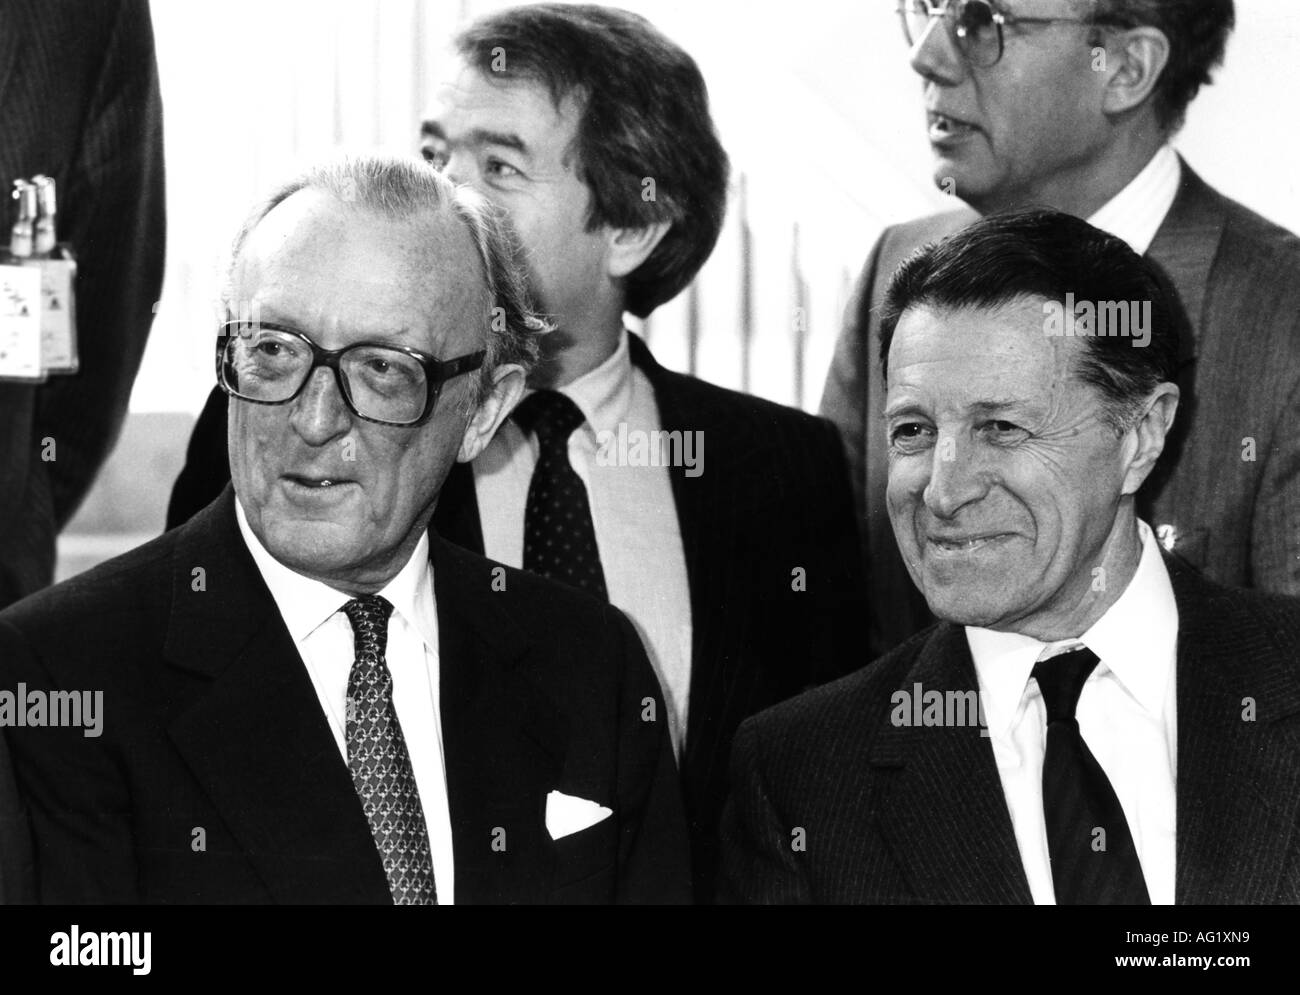 Weinberger, Caspar Willard 'Cap', 18.8.1917 - 28.3.2006, American politician, Secretary of State for Defense, portrait, with Lord Peter Alexander Rupert Carington, (6th Baron Carrington), at conference of nuclear planning group, Würzburg, 19.3.1986 - 21.3.1986, Stock Photo